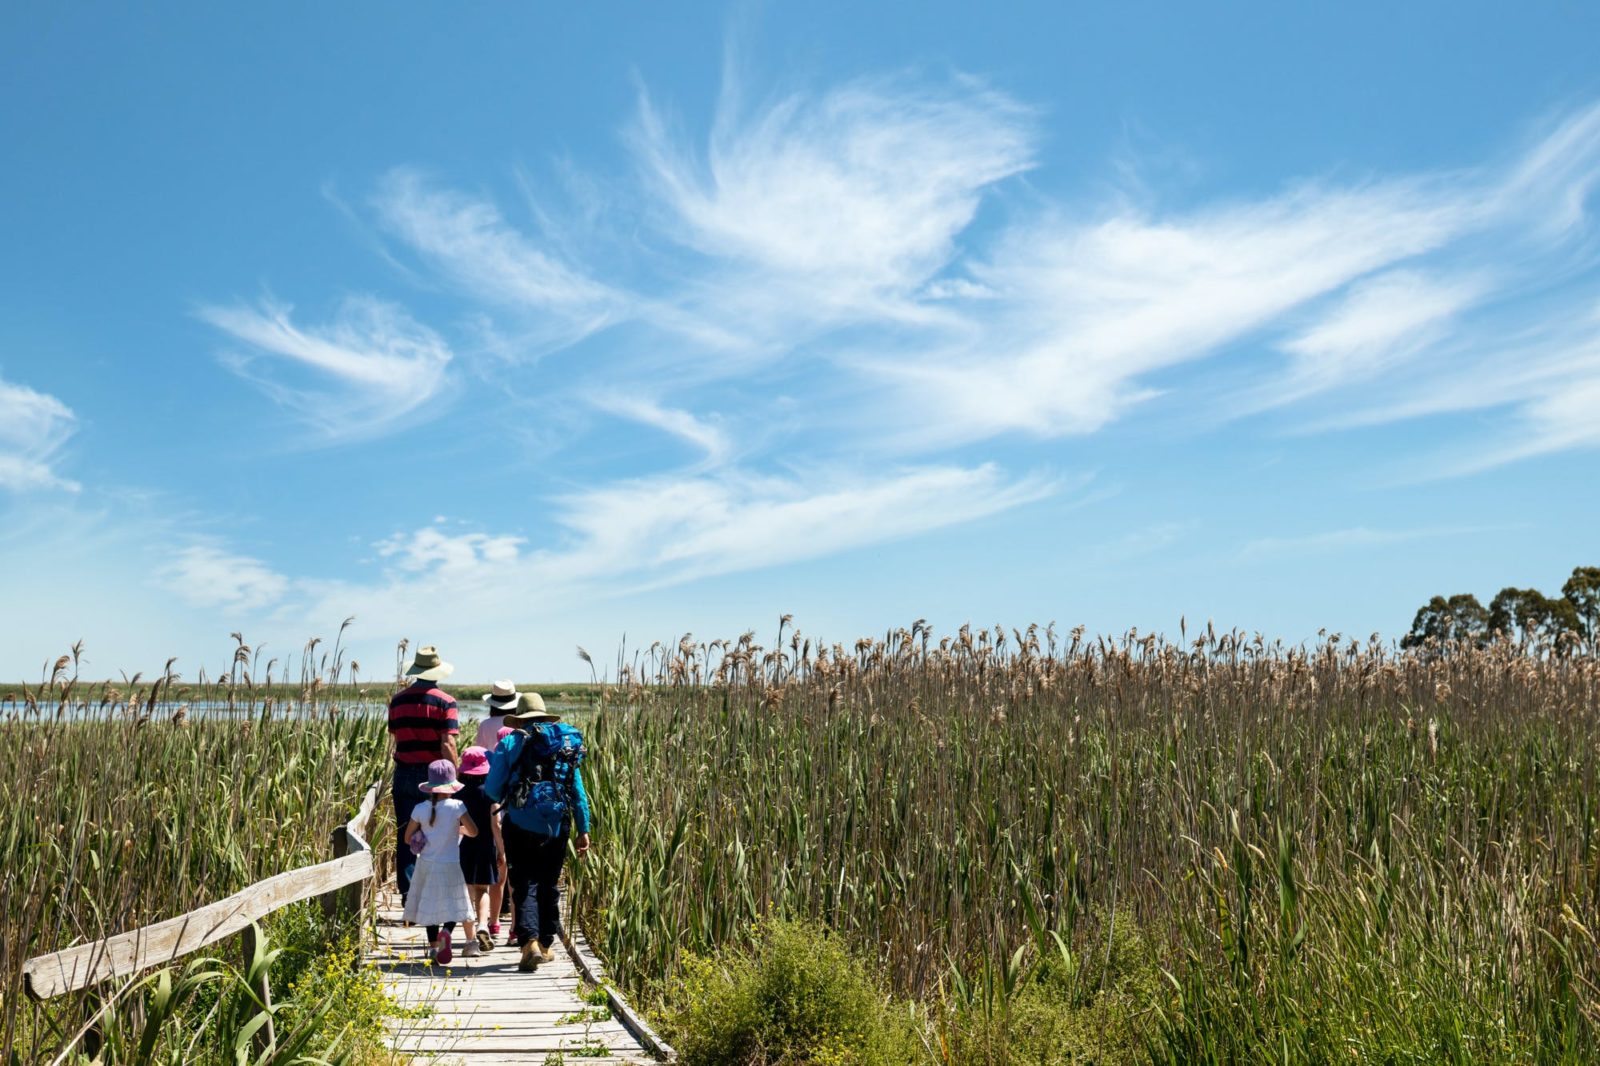 Group of people (adults and children) walking on a wooden boardwalk with reeds on either side.